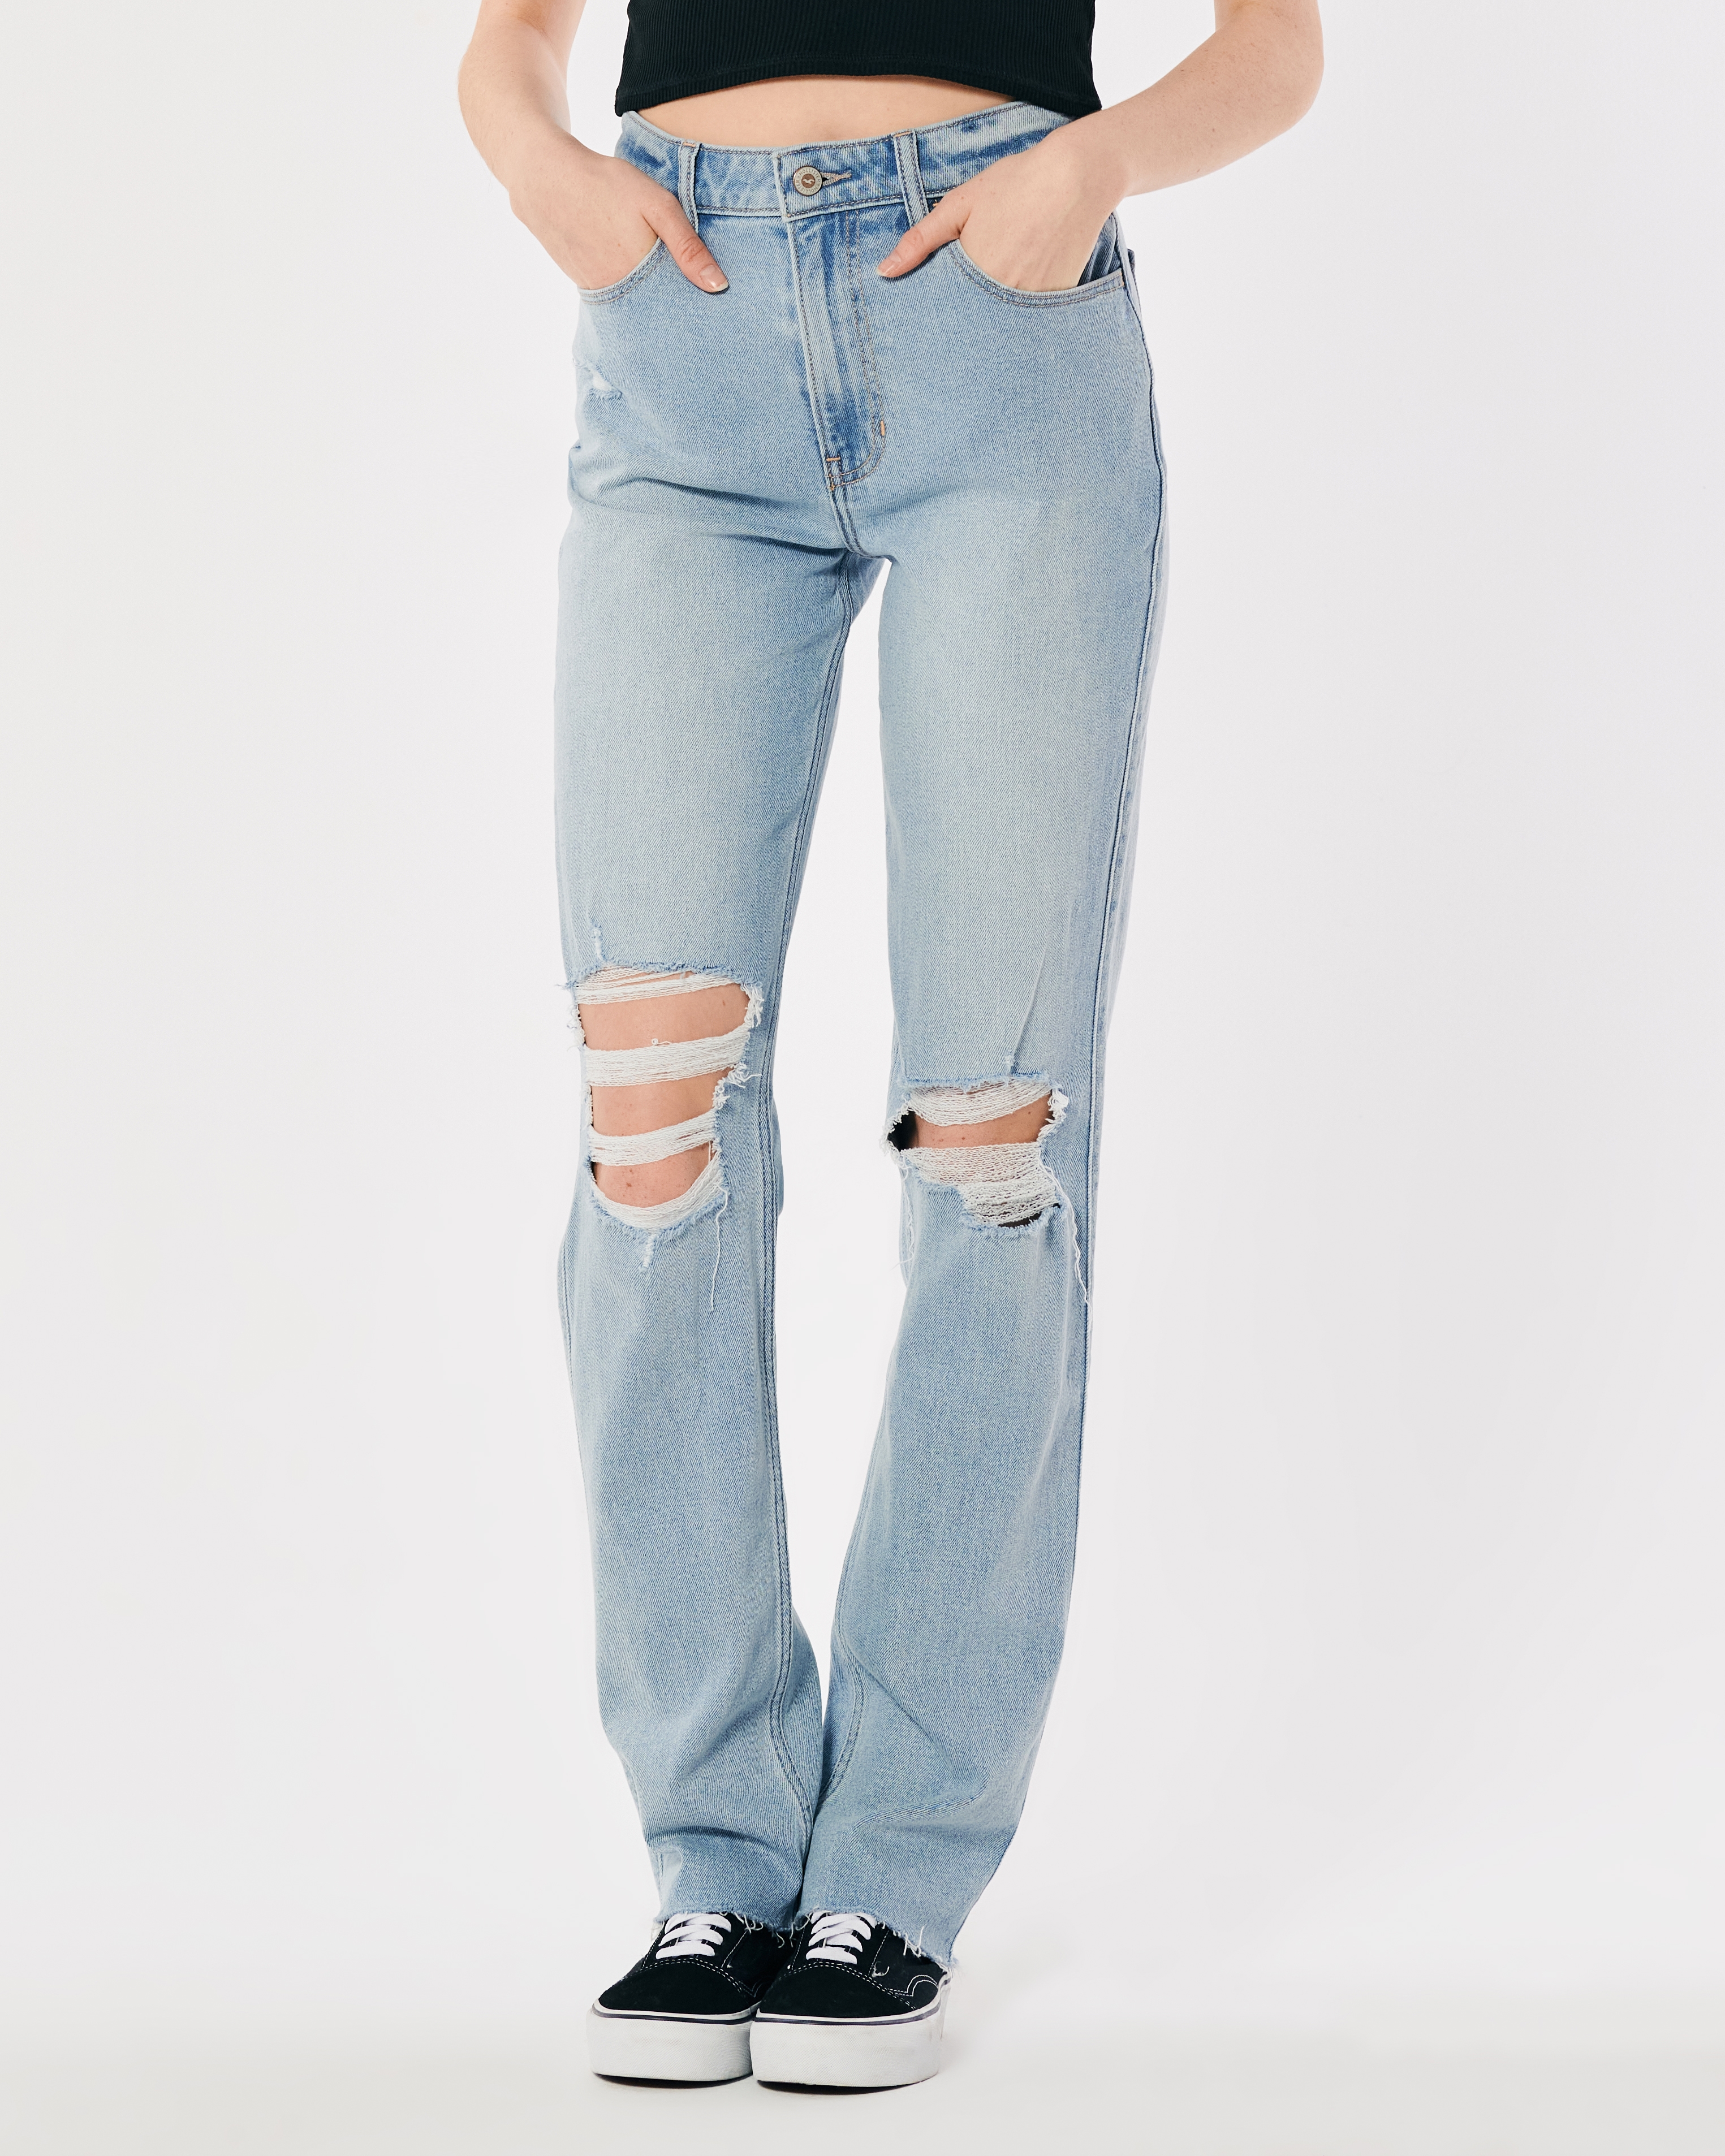 Women's Ultra High-Rise Ripped Light Wash 90s Straight Jeans